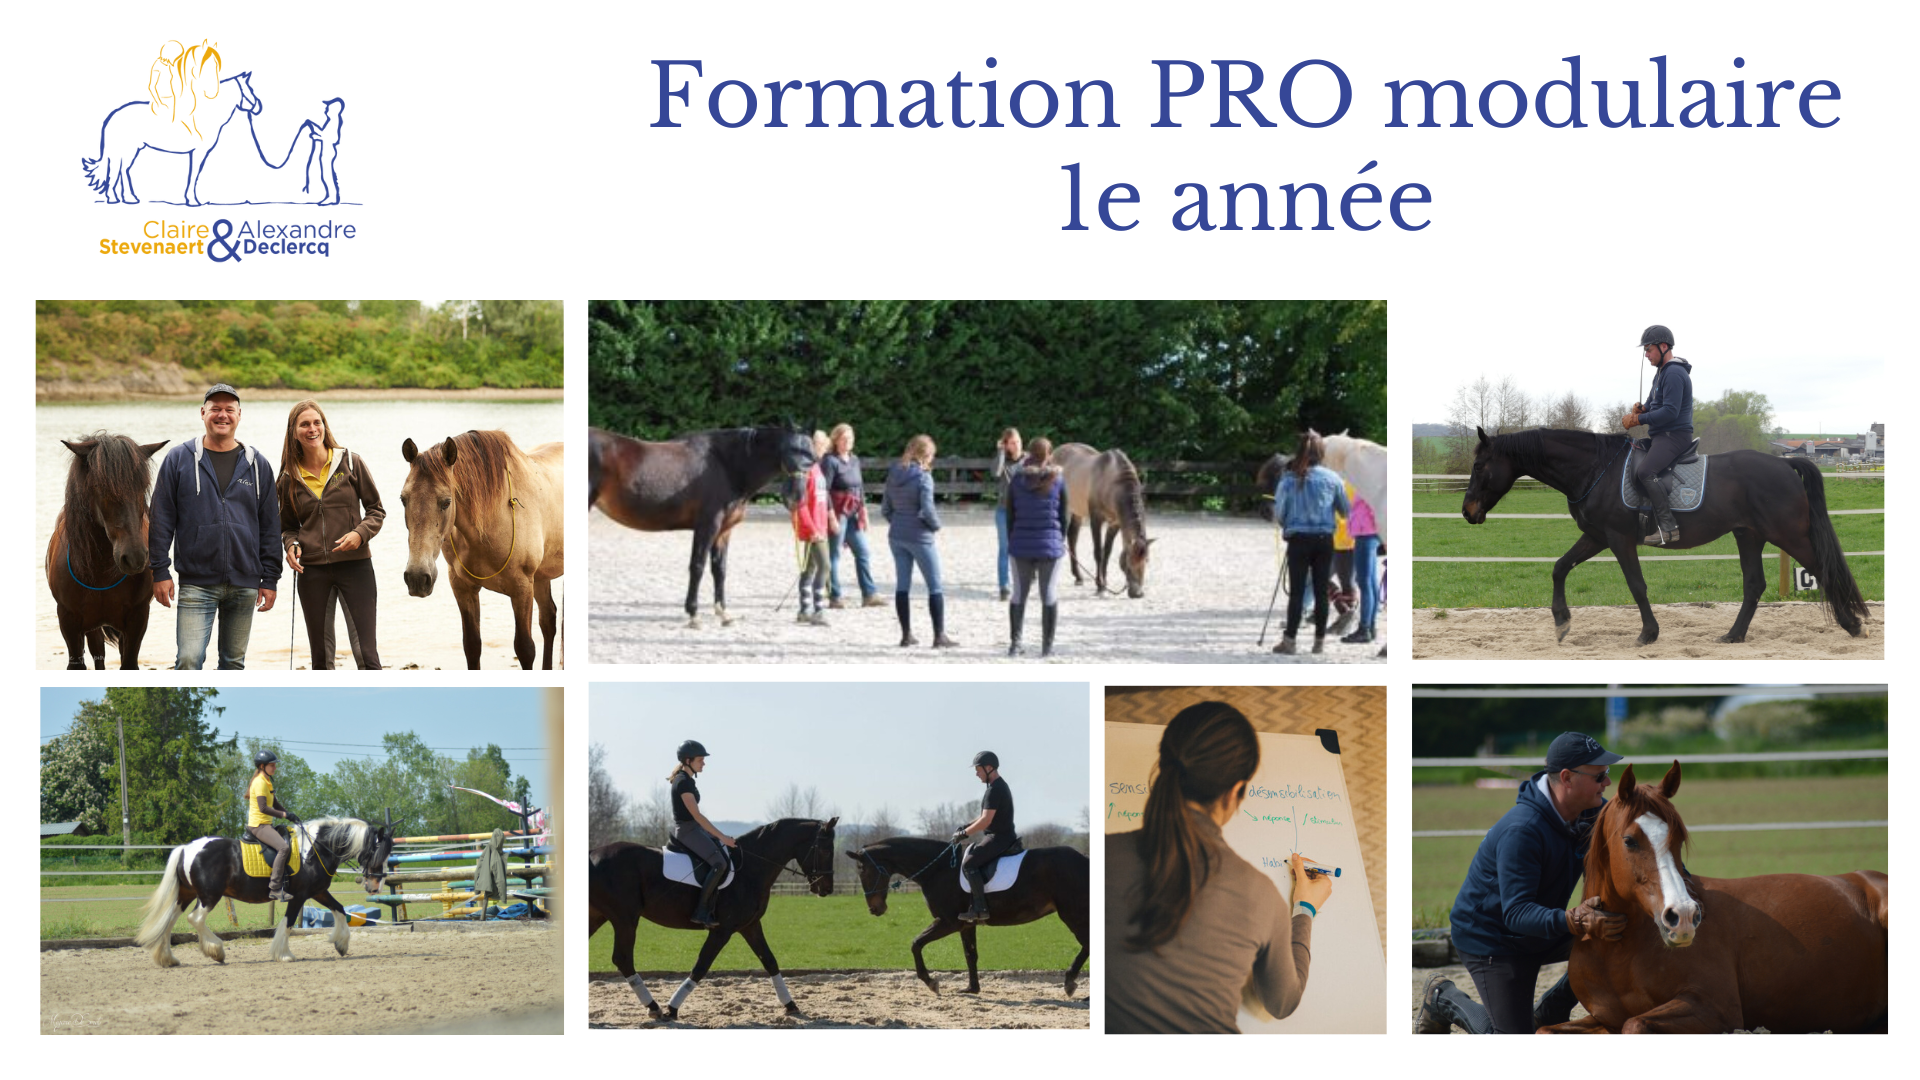 Formation PRO modulaire